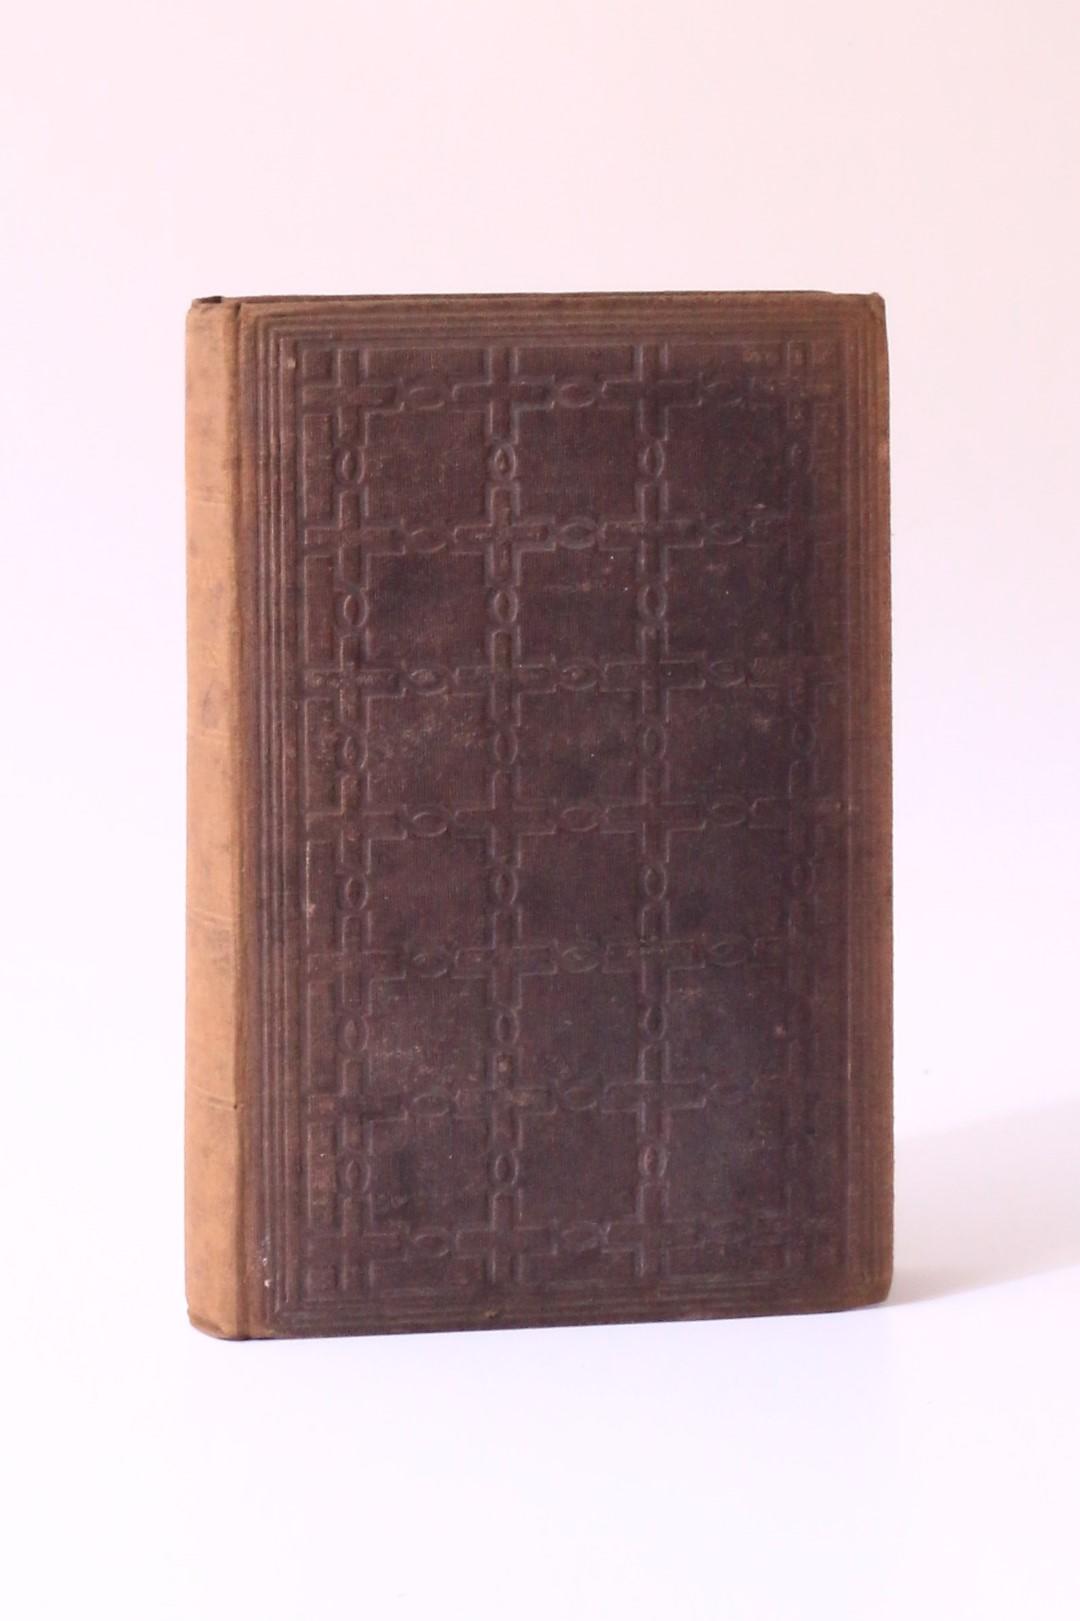 Frederic Townsend - Ghostly Colloquies - D. Appleton, 1856, First Edition.